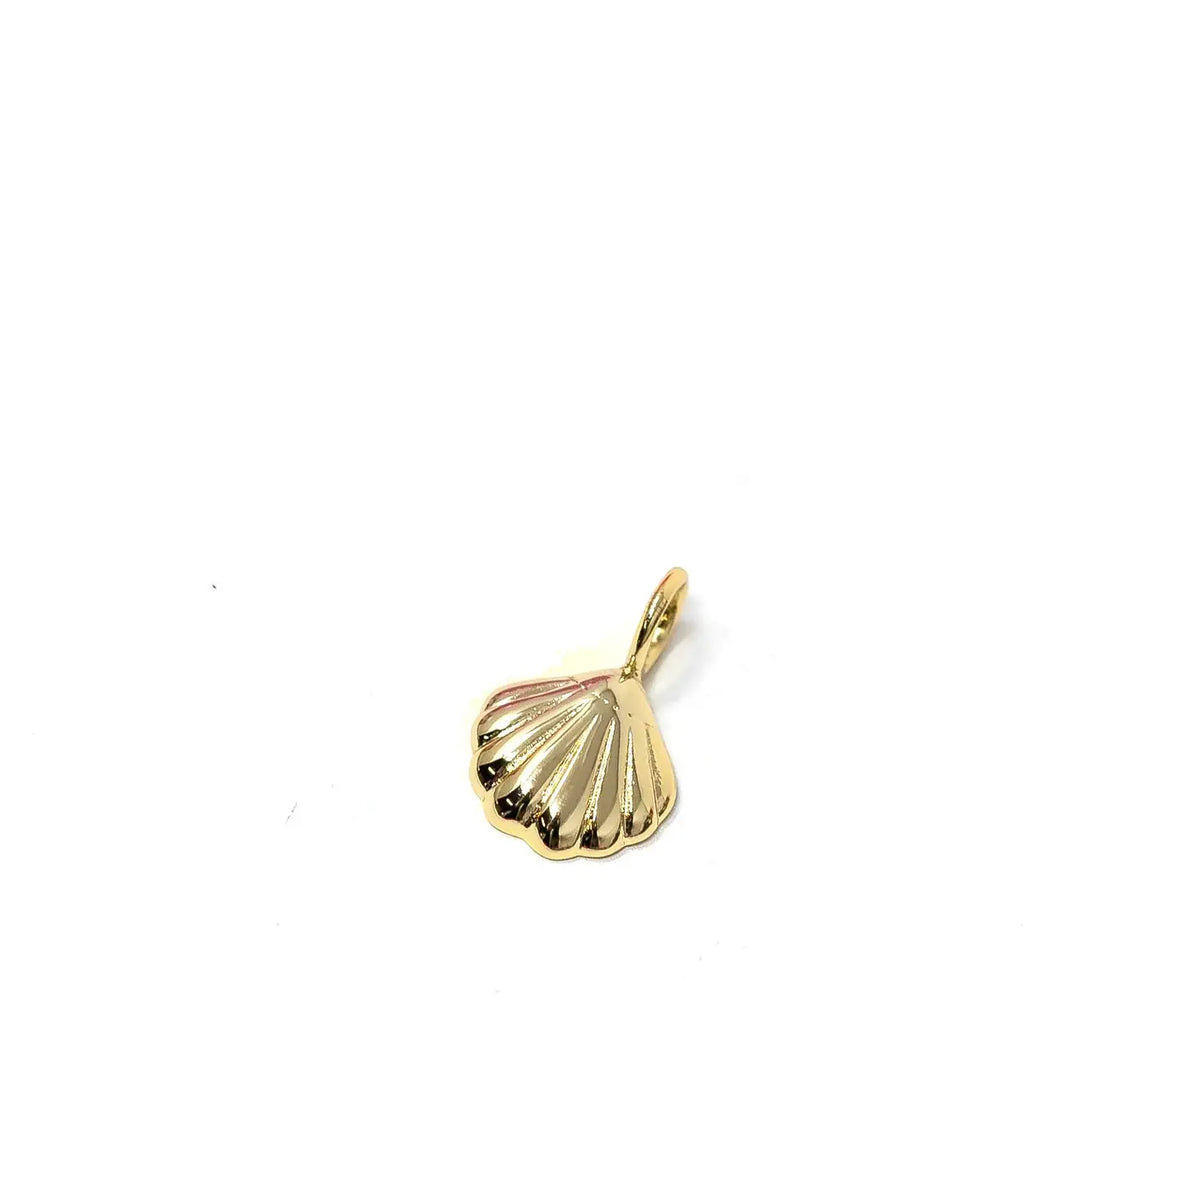 Seashell Necklace Charm-Gold Seashell Necklace Charm. Removable and interchangeable to layer with other charms on your favorite necklaces! Looks great with our Baby Ball, Skinny Rope and Mini Paperclip Chains! -Cali Moon Boutique, Plainville Connecticut